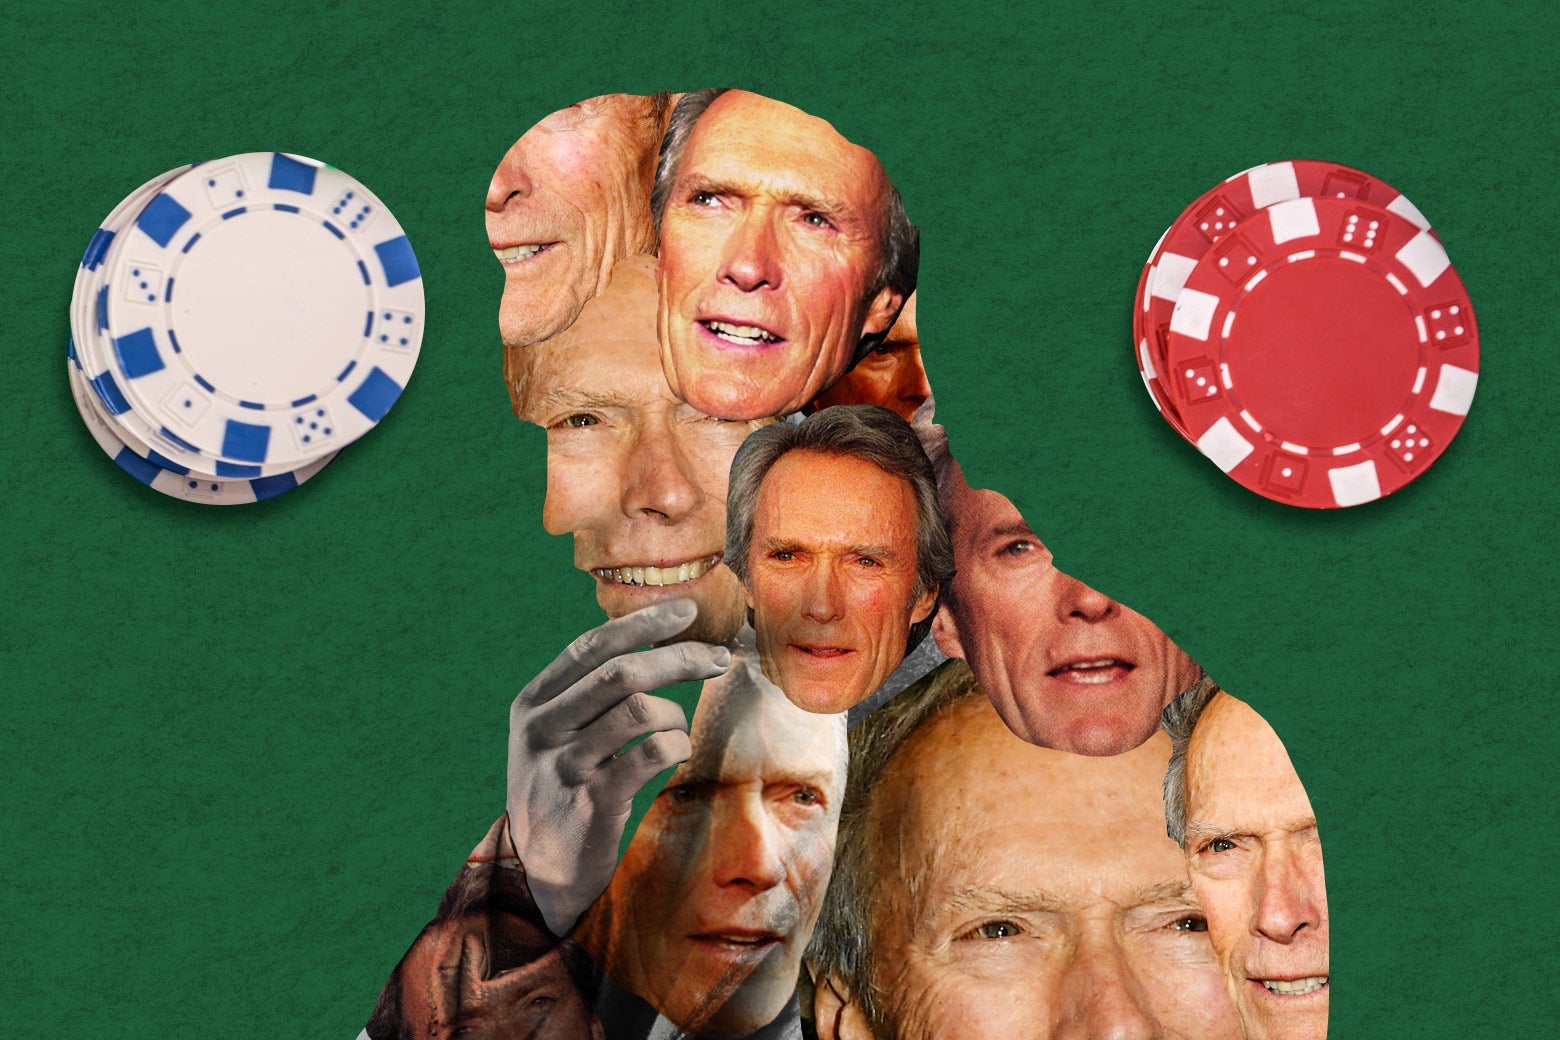 Photos of Clint Eastwood inside a silhouette of a thinking man with poker chips surrounding the image on a poker table.